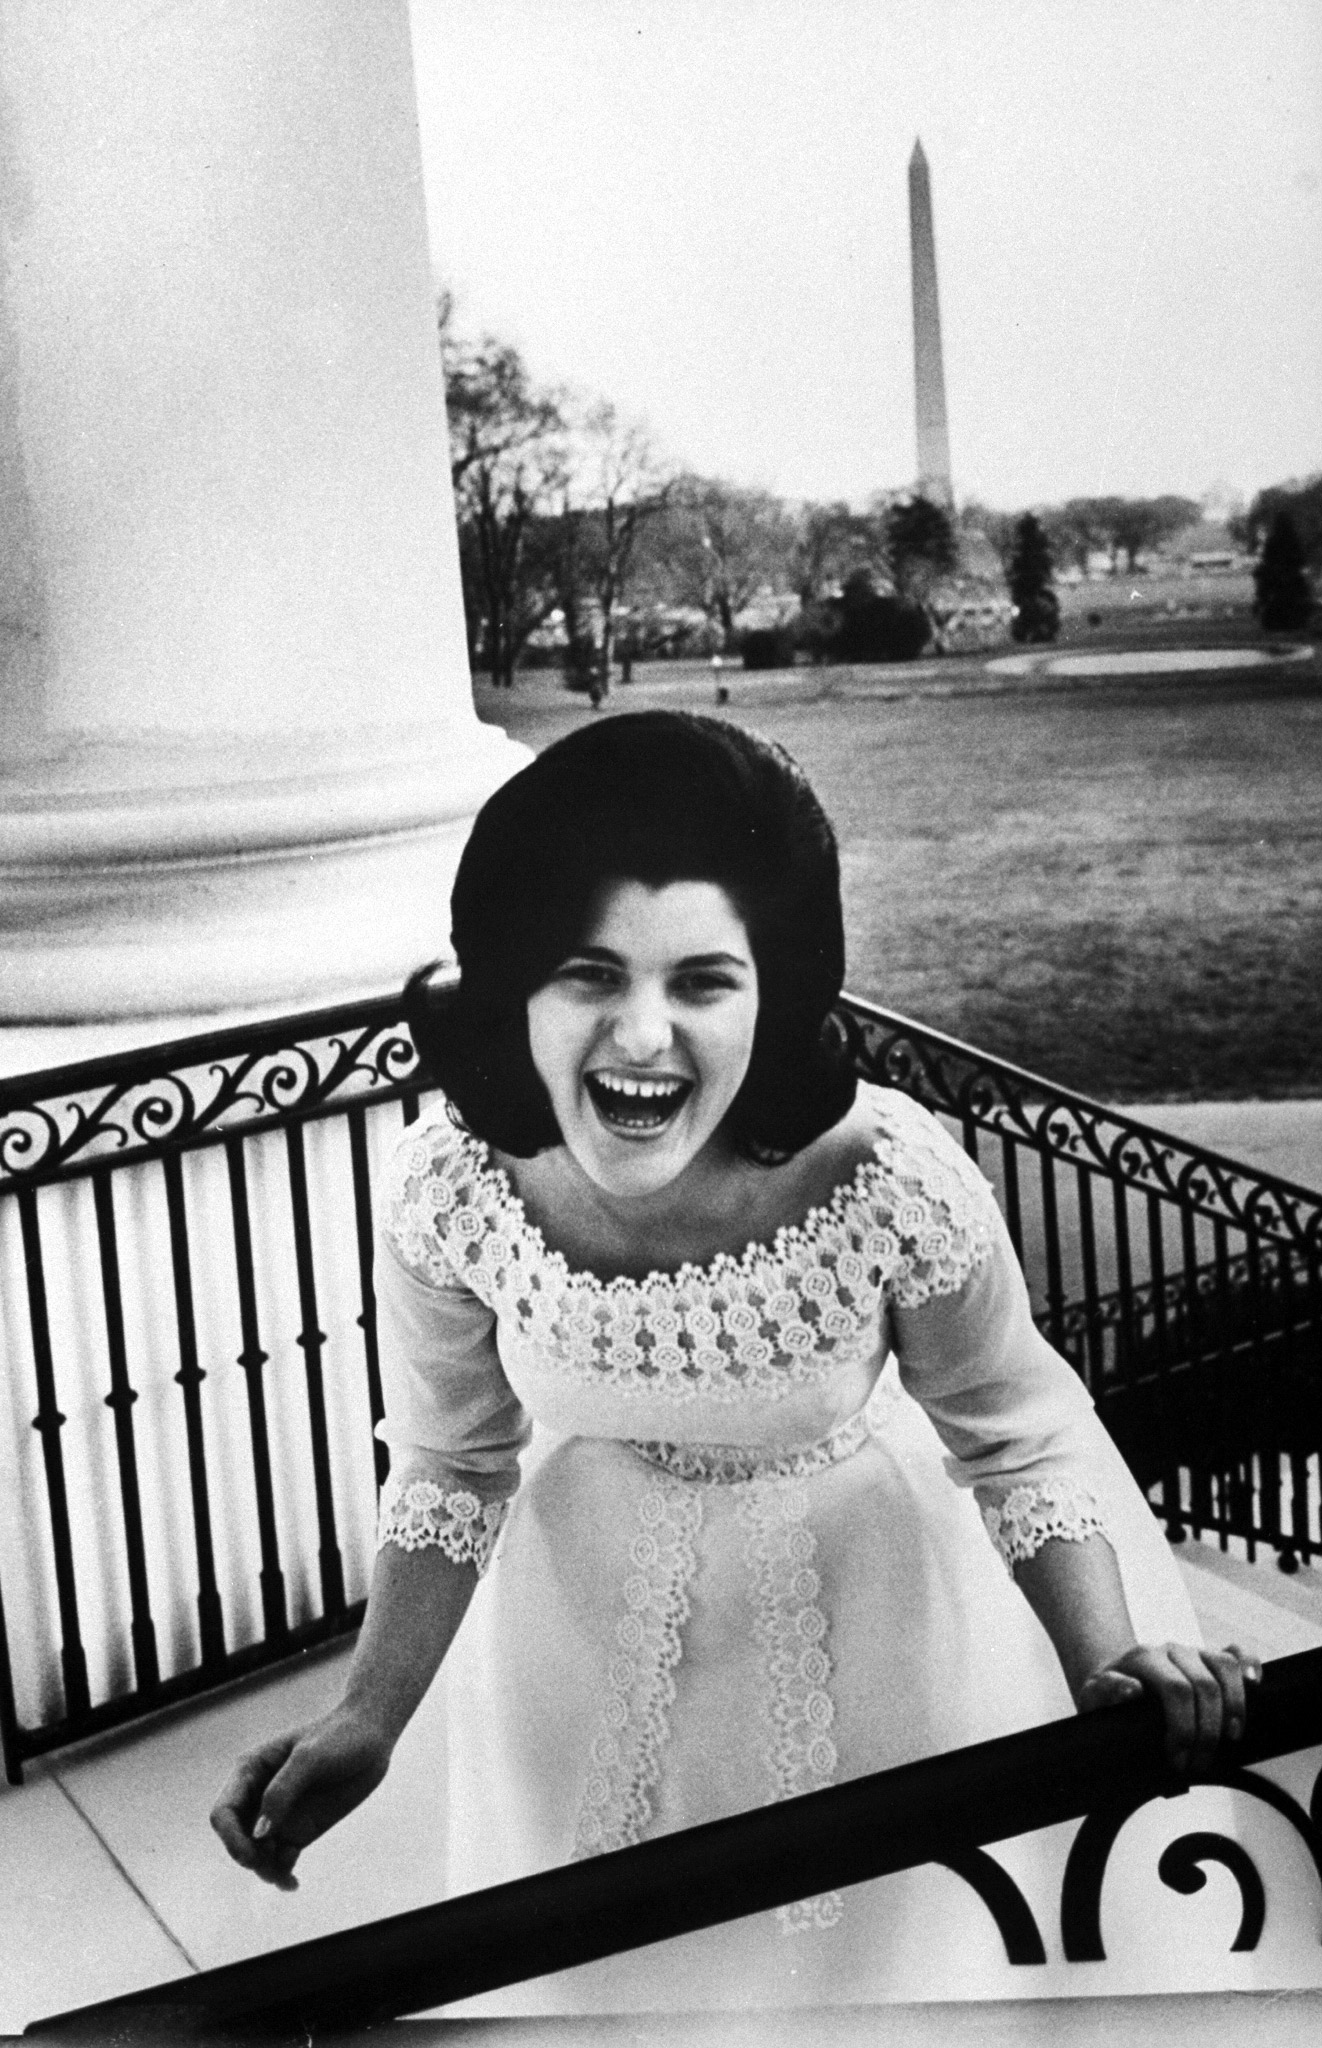 Dressed in new ball gown and laughing about a boy she knows, Luci Baines Johnson, 16, mounts the back-porch steps of her Pennsylvania home.